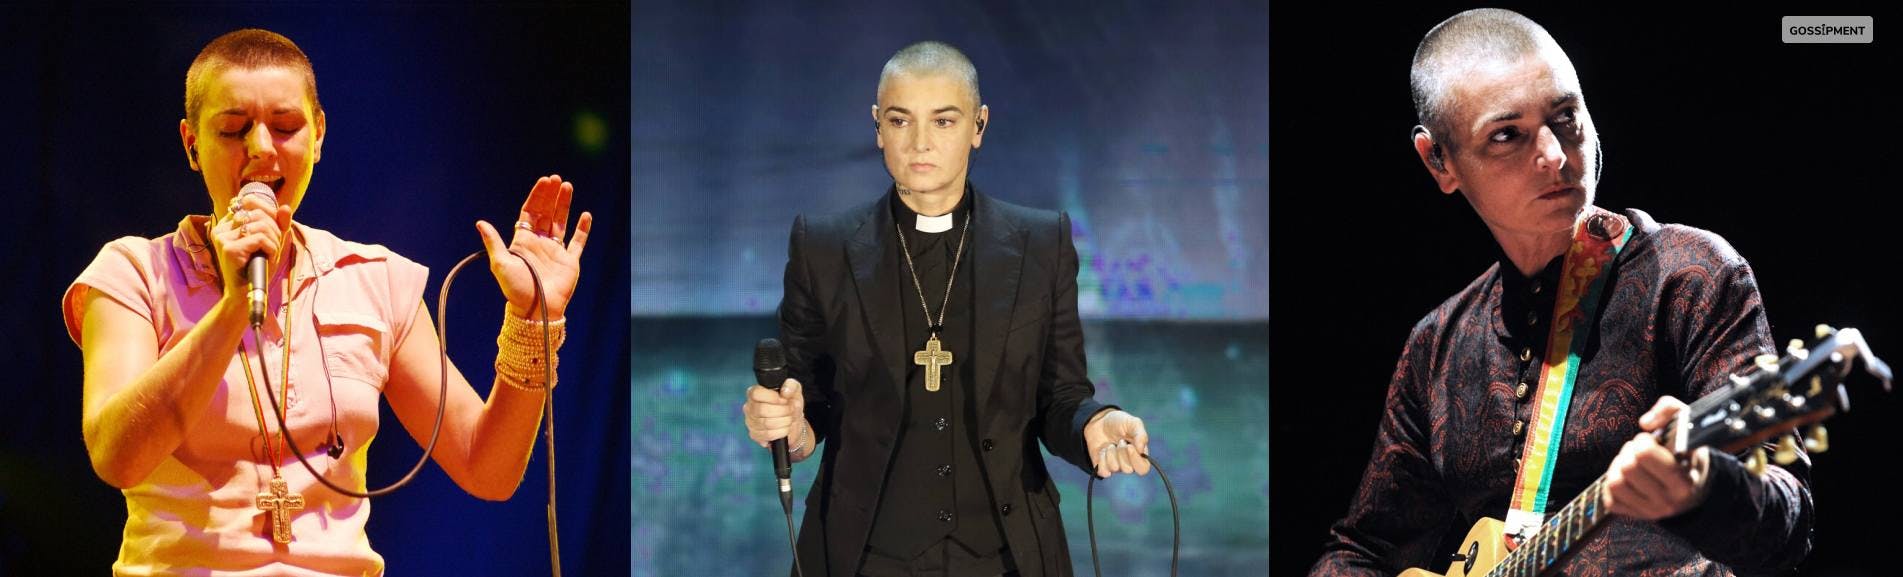 Cover Image for Irish Singer Sinead O’connor Passes Away at the Age of 56